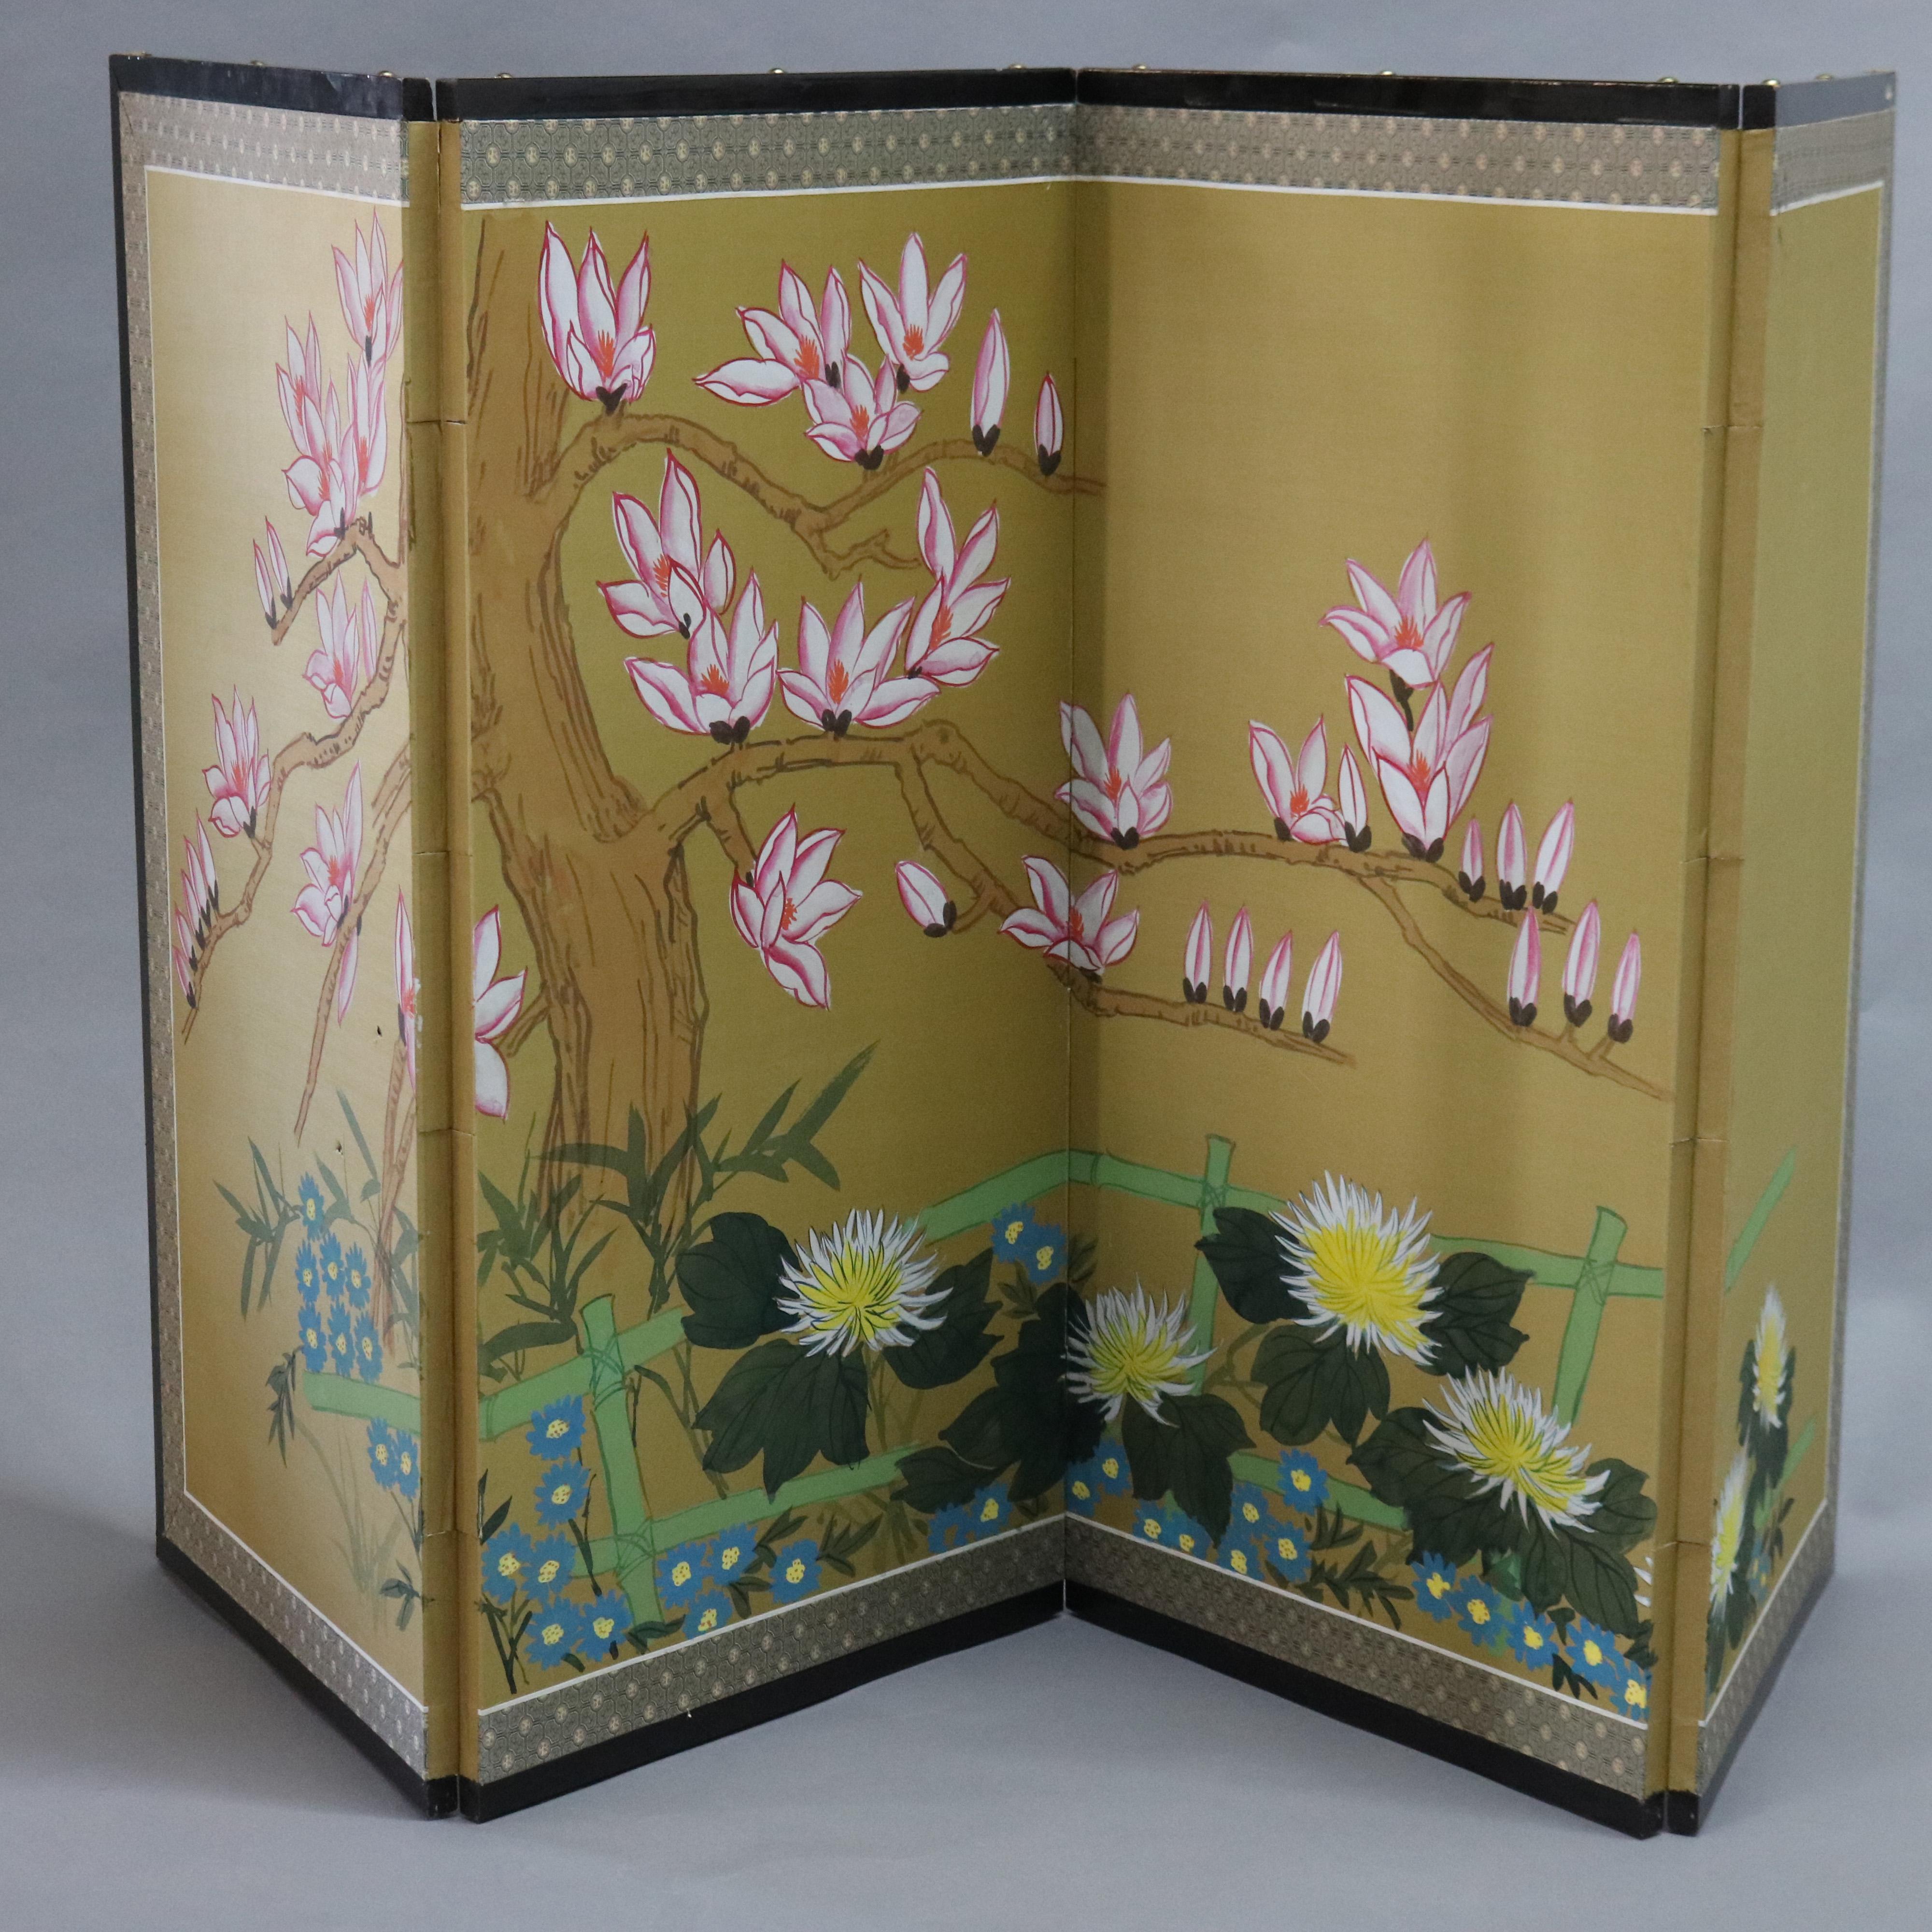 A Chinese Floral Decorated and Ebonized Table Screen 20th C

Measures - 35.25''H x 69.5''W x .75''D; panels each 35.25''H x 17.5''W x .75''.

Catalogue Note: Ask about DISCOUNTED DELIVERY RATES available to most regions within 1,500 miles of New